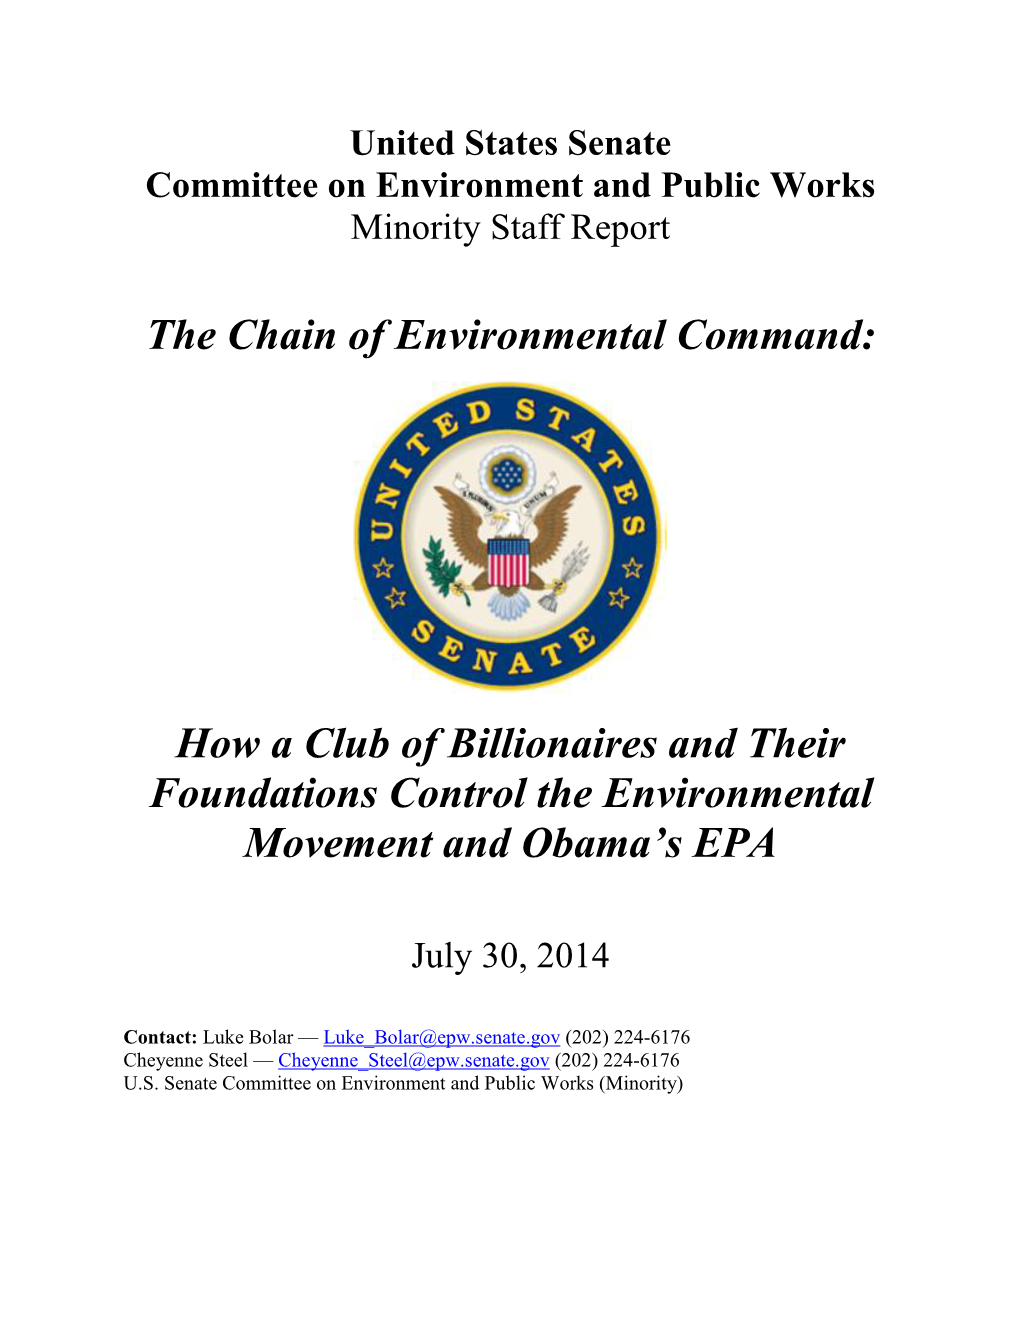 The Chain of Environmental Command